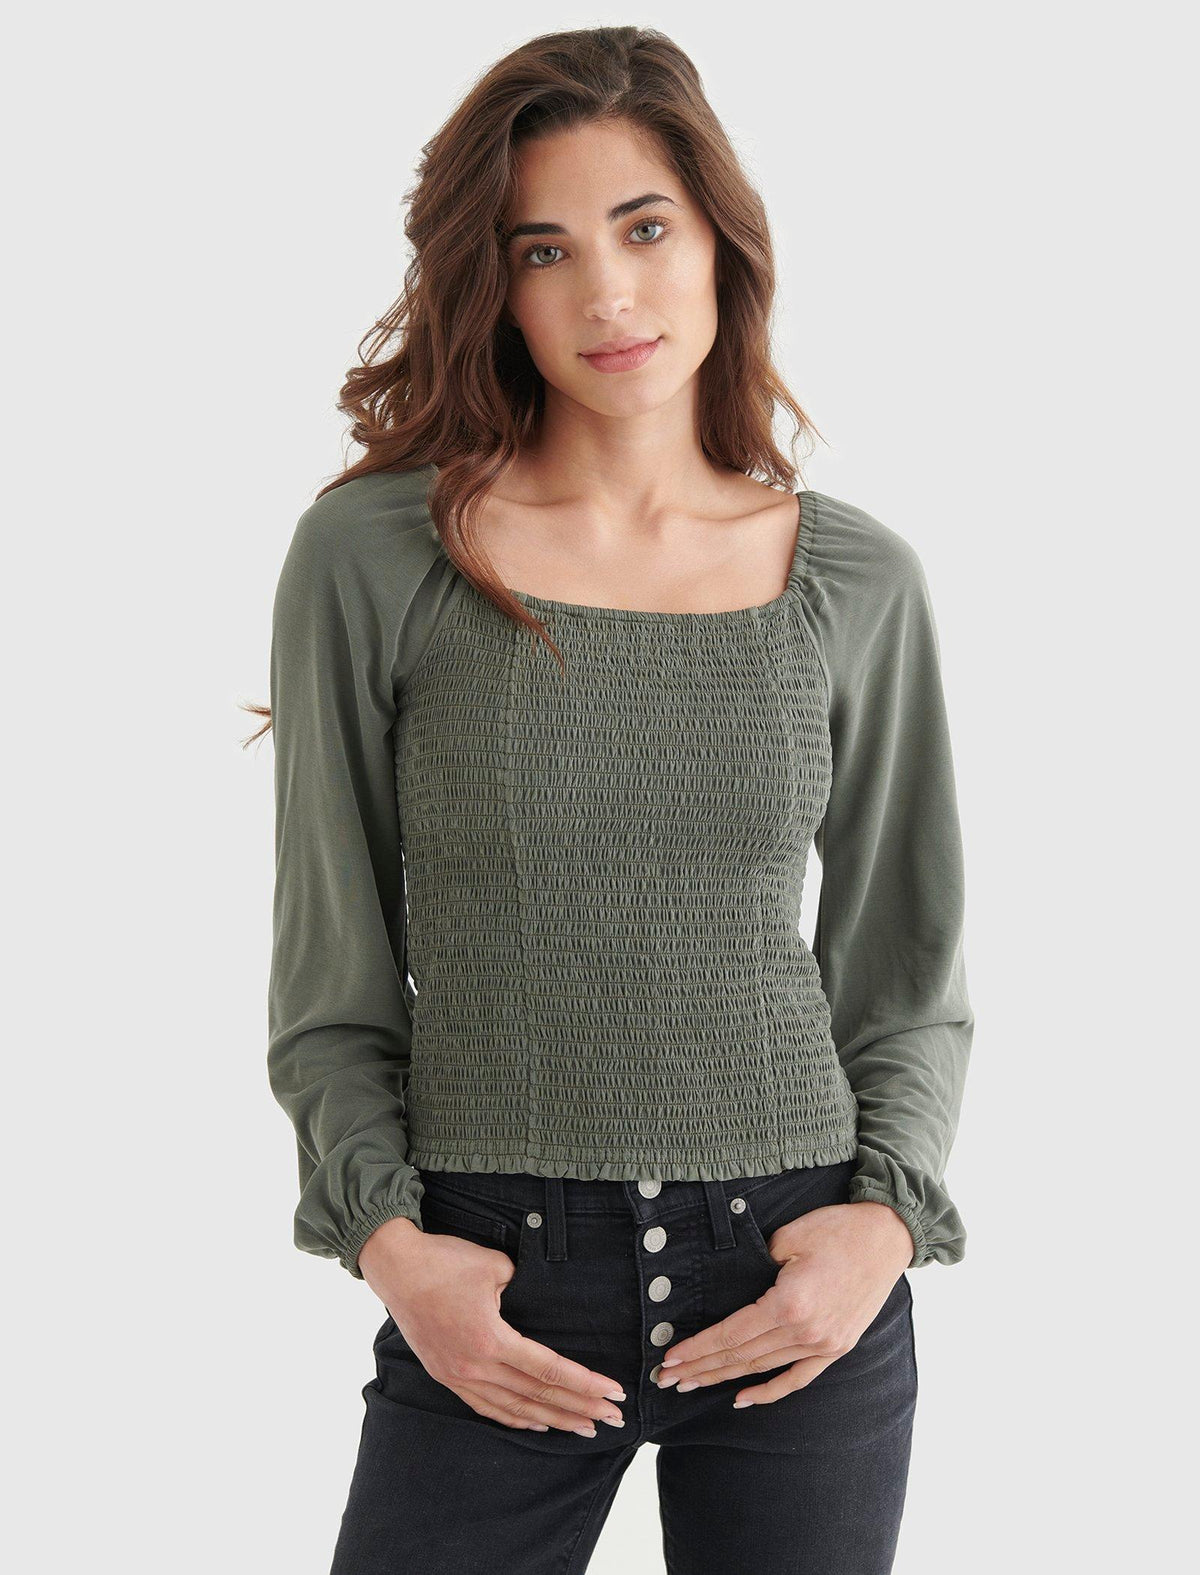 Lucky Brand Smocked Square Neck Knit Top - Women's Clothing Knit Tops Tee Shirts Olive